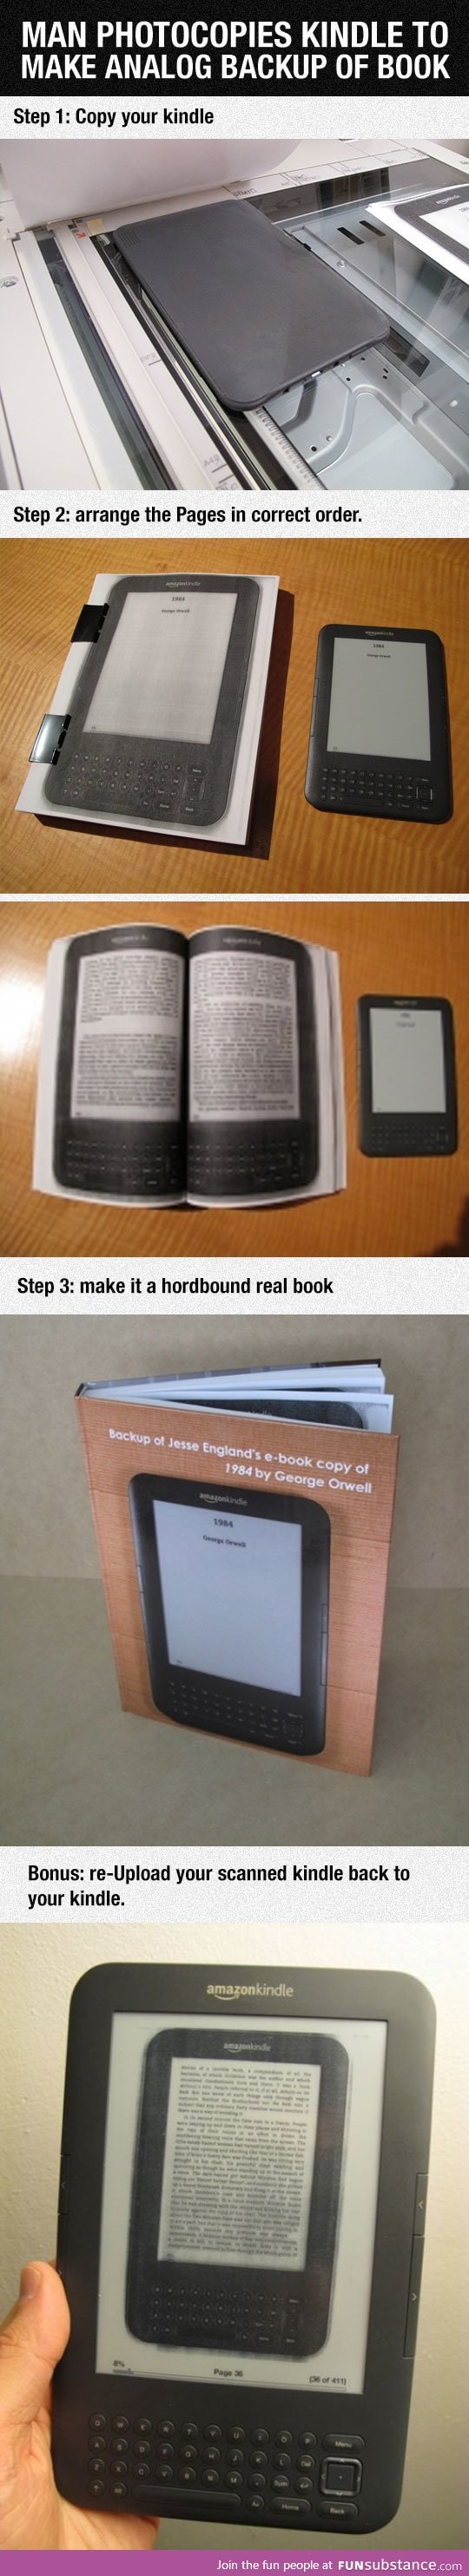 Make a backup of your Kindle's book